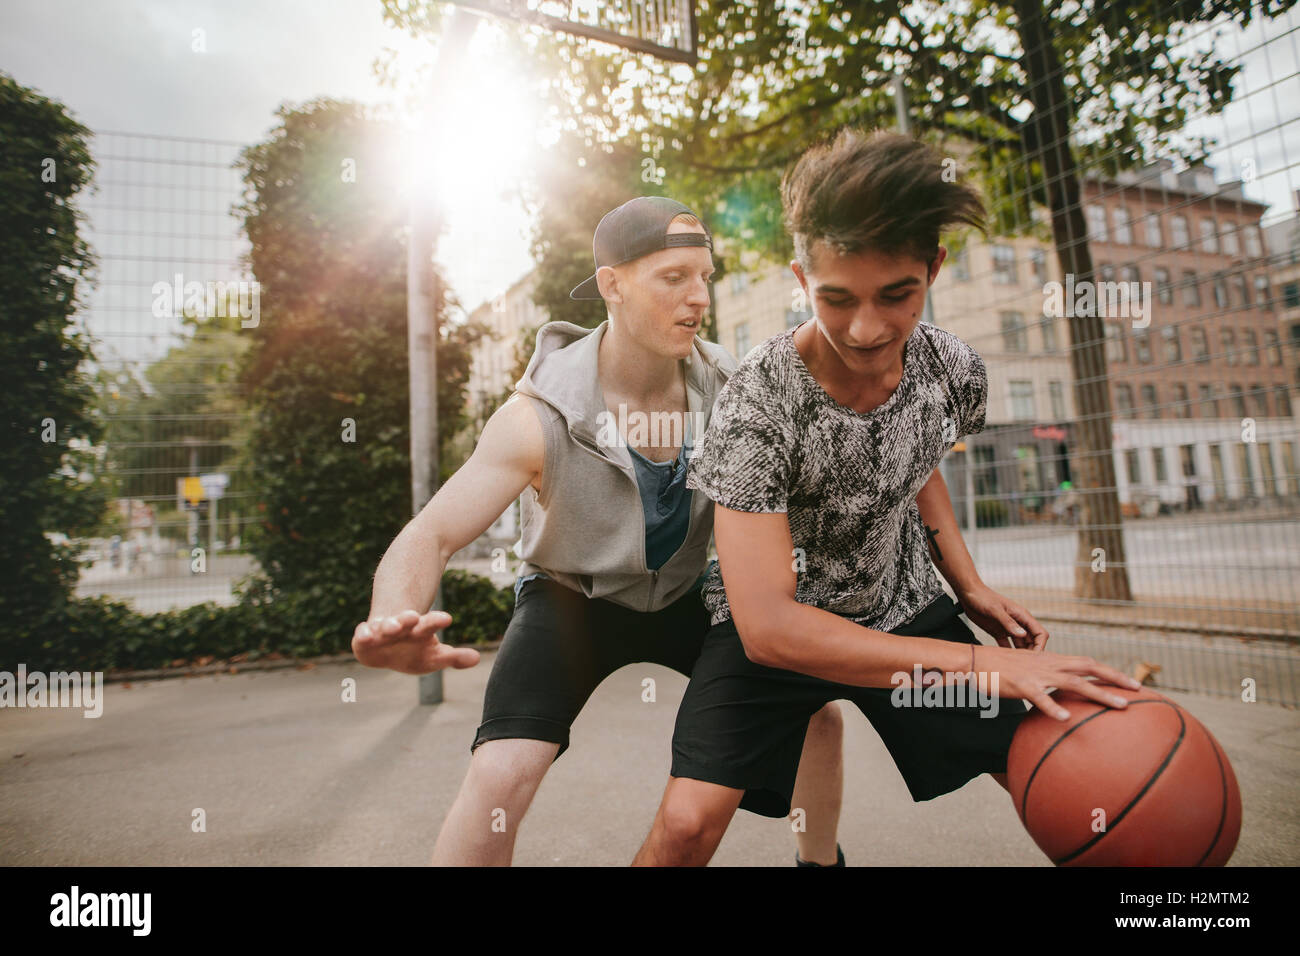 Young man dribbling basketball with friend blocking. Friends playing basketball on outdoor court and having fun. Stock Photo